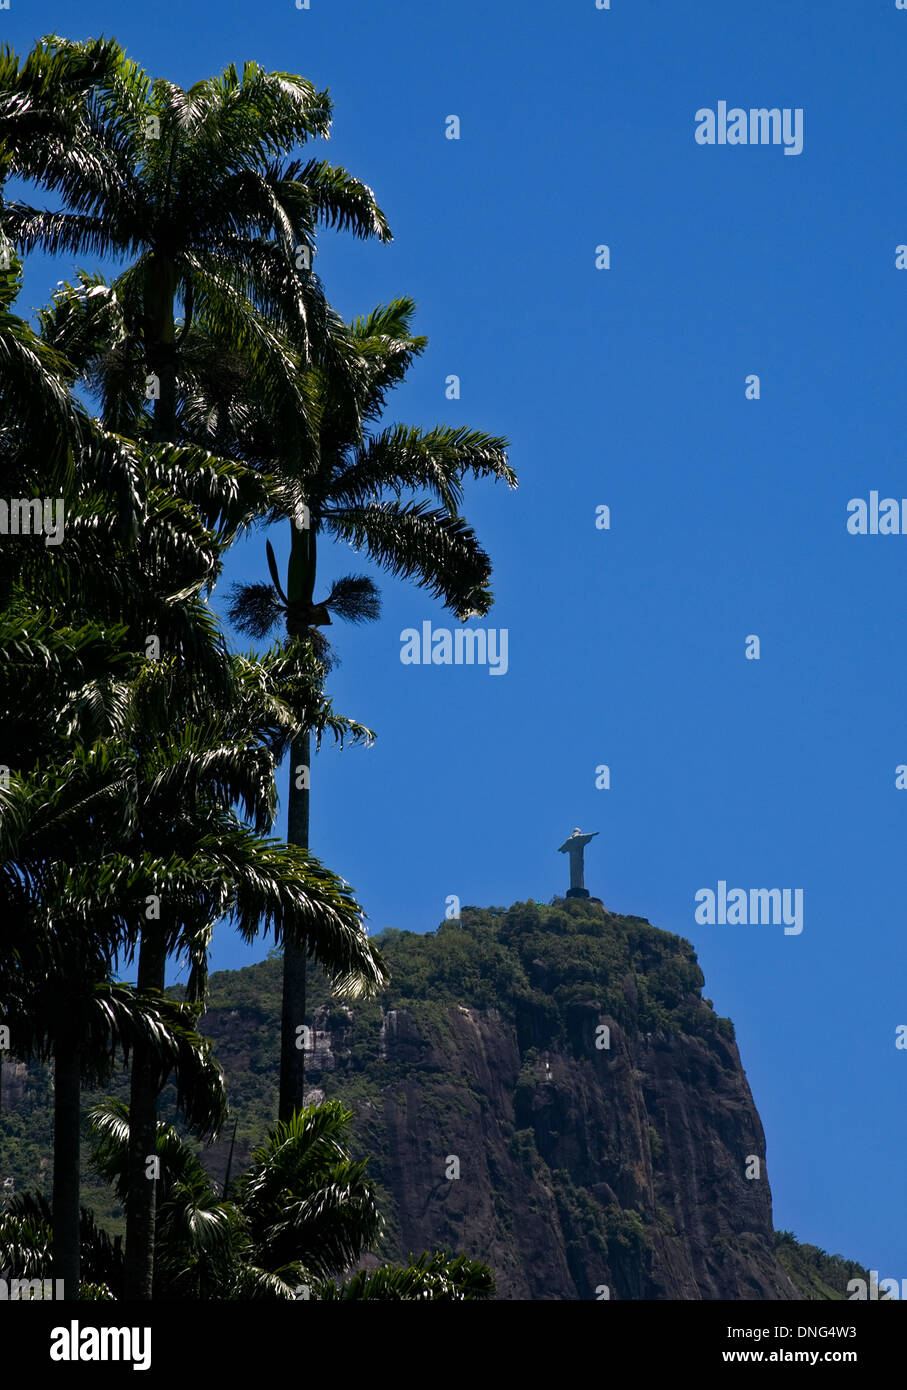 View of palm trees and Christ the Redeemer in Rio de Janeiro. Brazil. Stock Photo